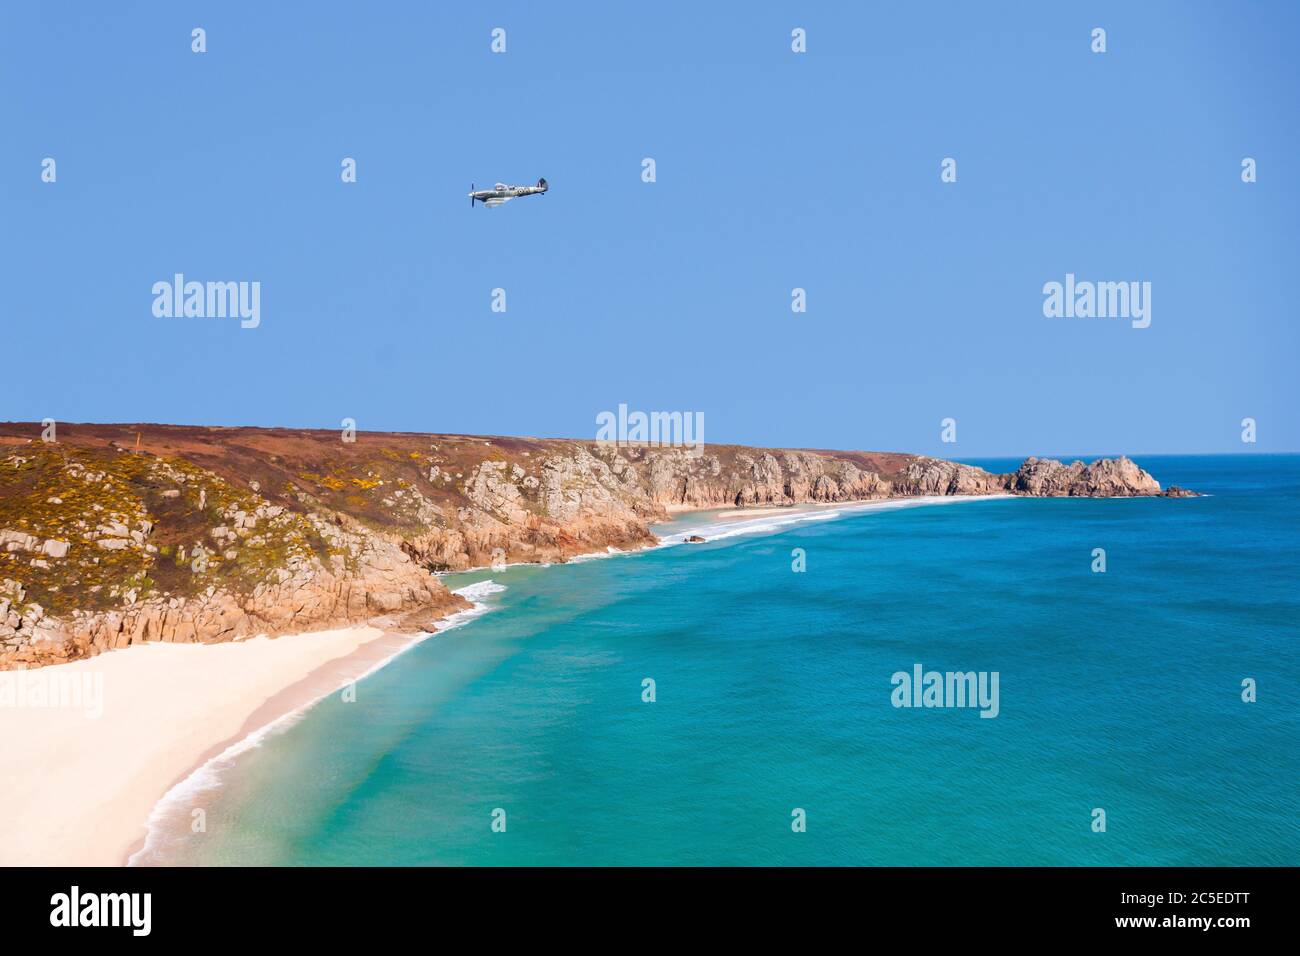 A Spitfire Aeroplane Flying over Porthcurno Beach, Porthcurno, Cornwall, South West, England, UK Stock Photo